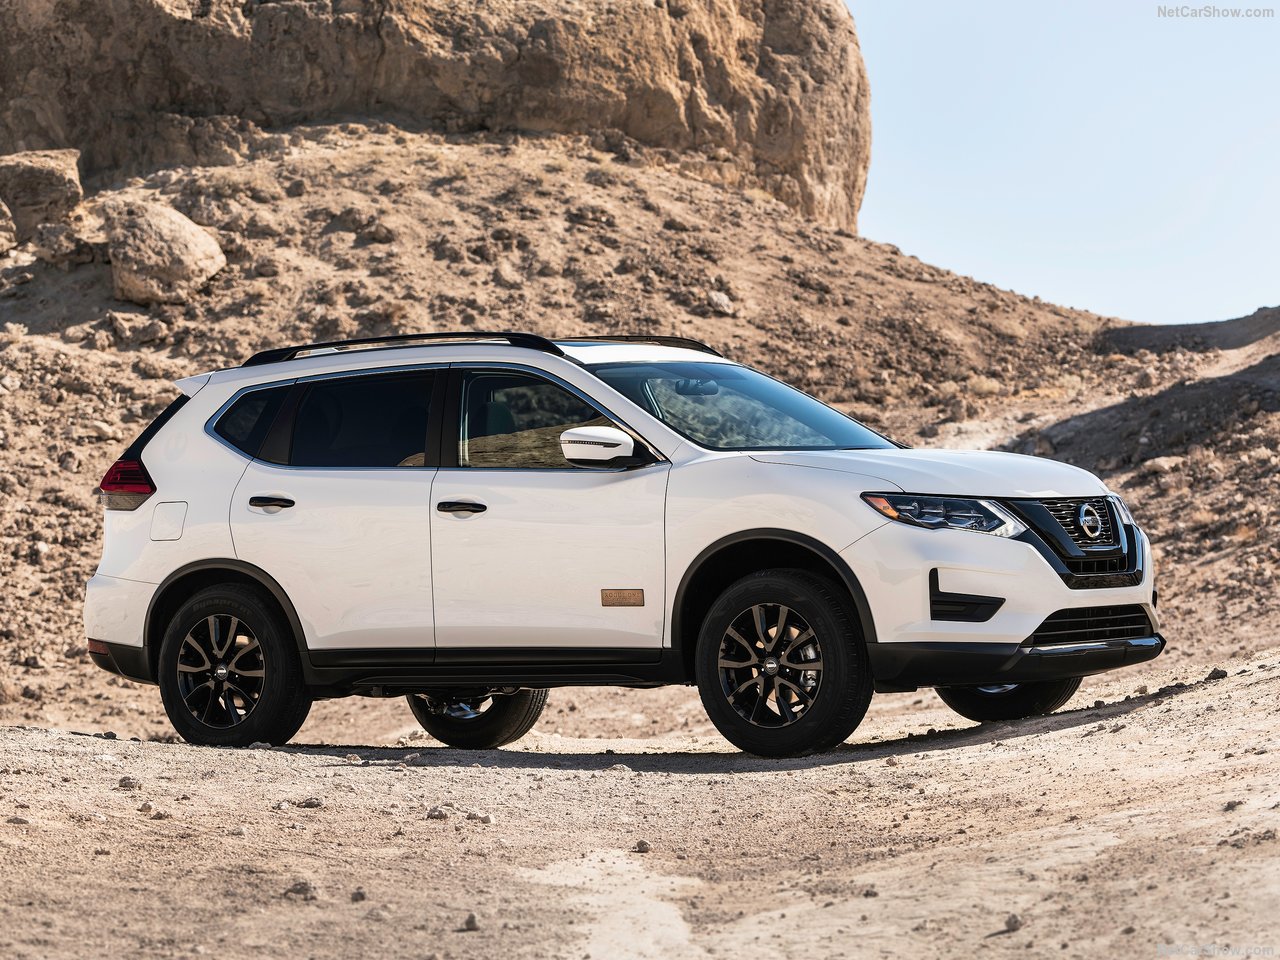 nissan-rogue_one_star_wars_edition-2017-1280-01